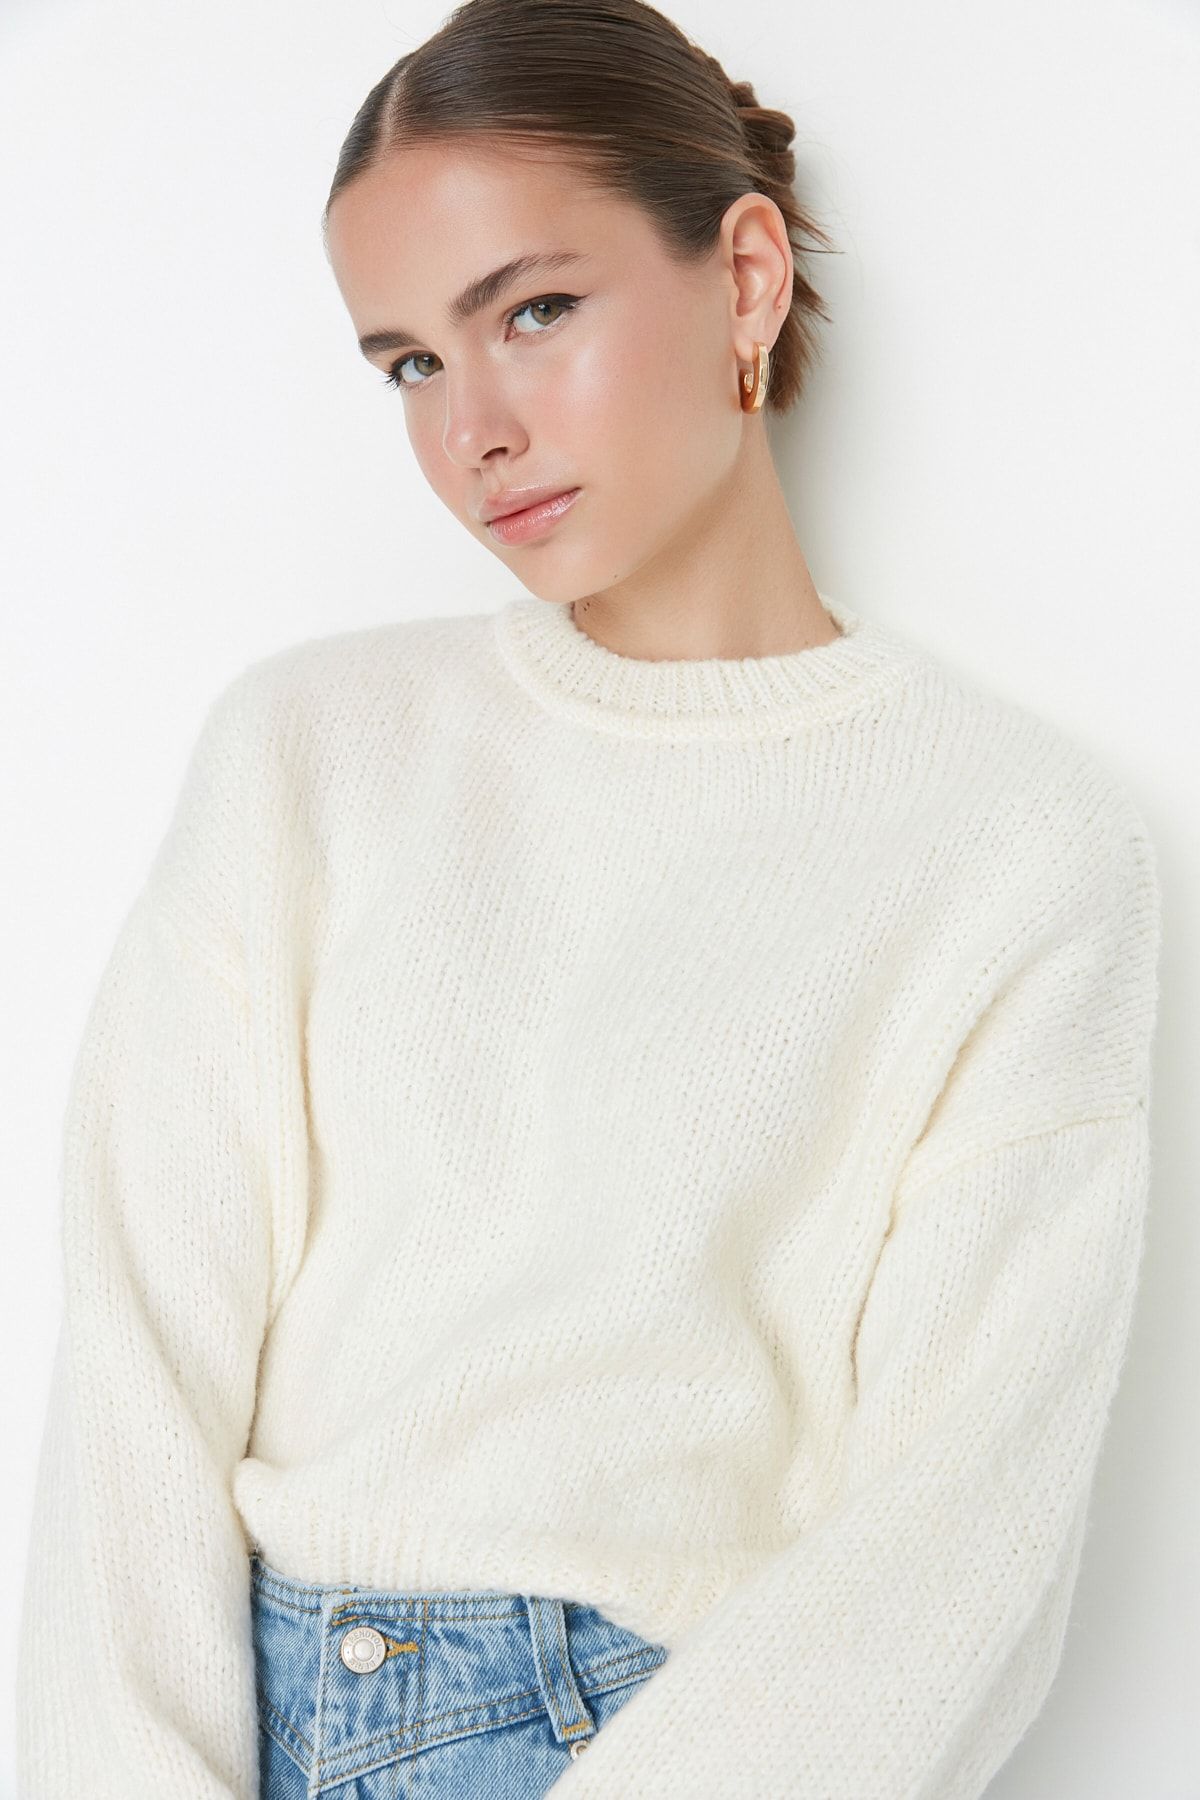 Women's Sweaters & Cardigans  Cozy Chic for Everyday - Trendyol